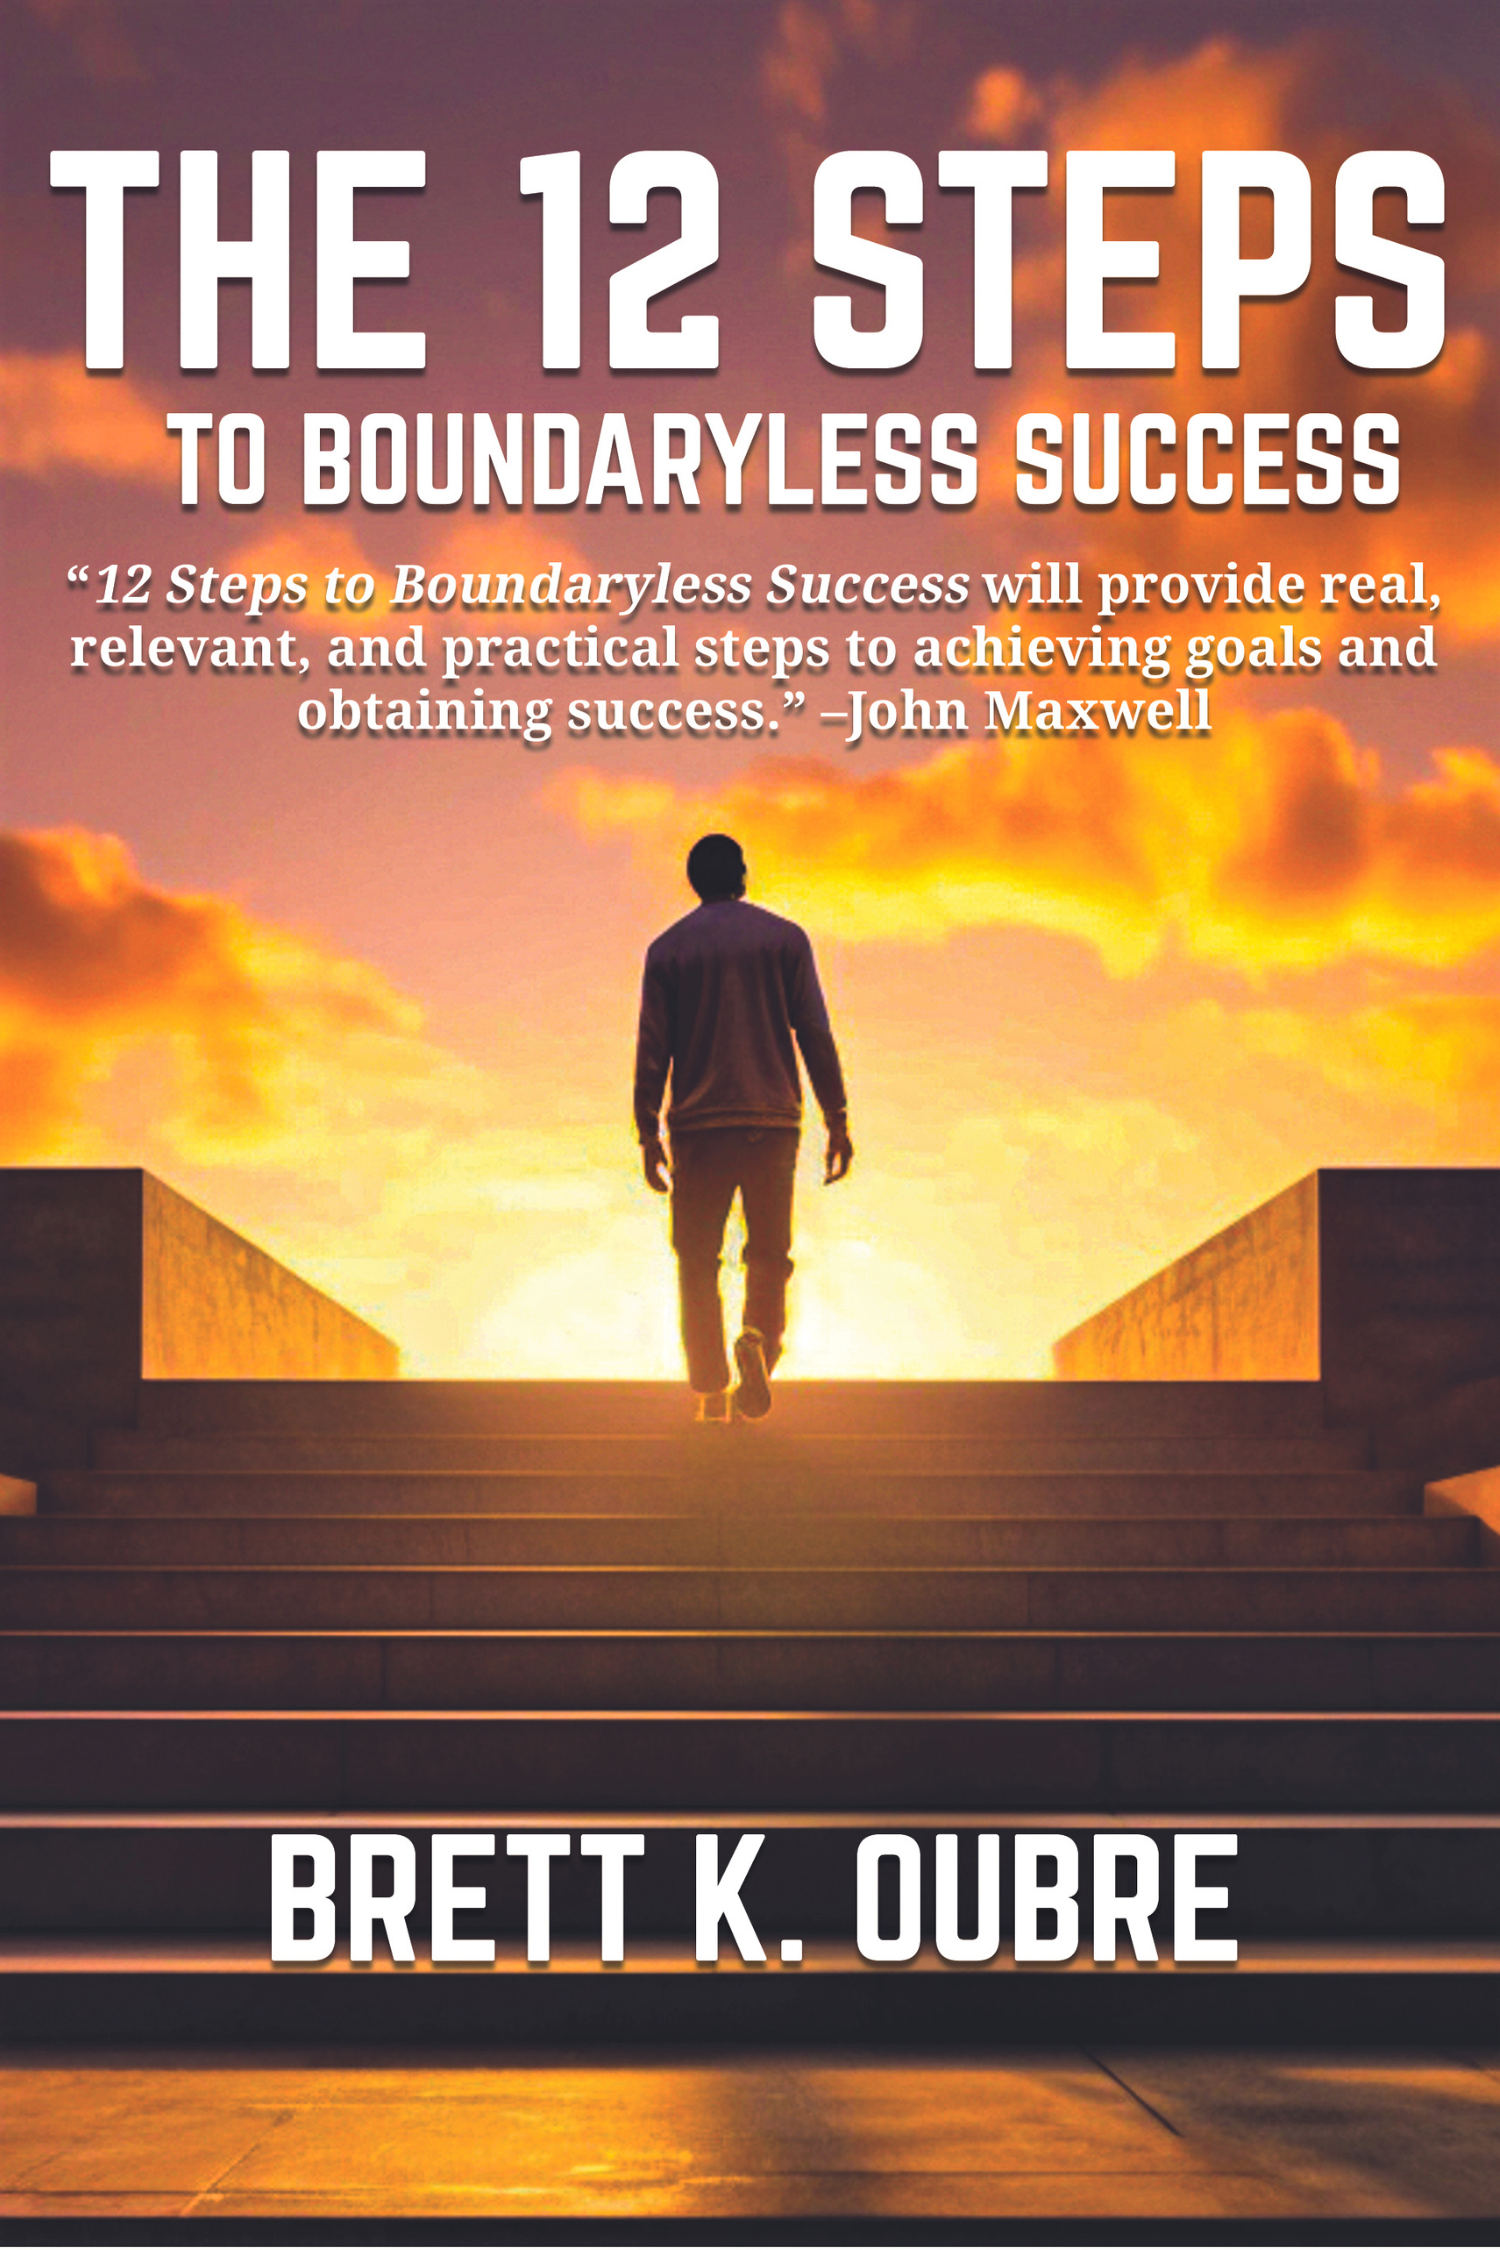 Reflecting on my journey and experiences, I realize there is no roadmap to success. No road signs in life tell you which route to take. Discover your own. The good news is you can learn how to do just that. Reading this book will help you find the path leading to your version of success. –Brett Oubre